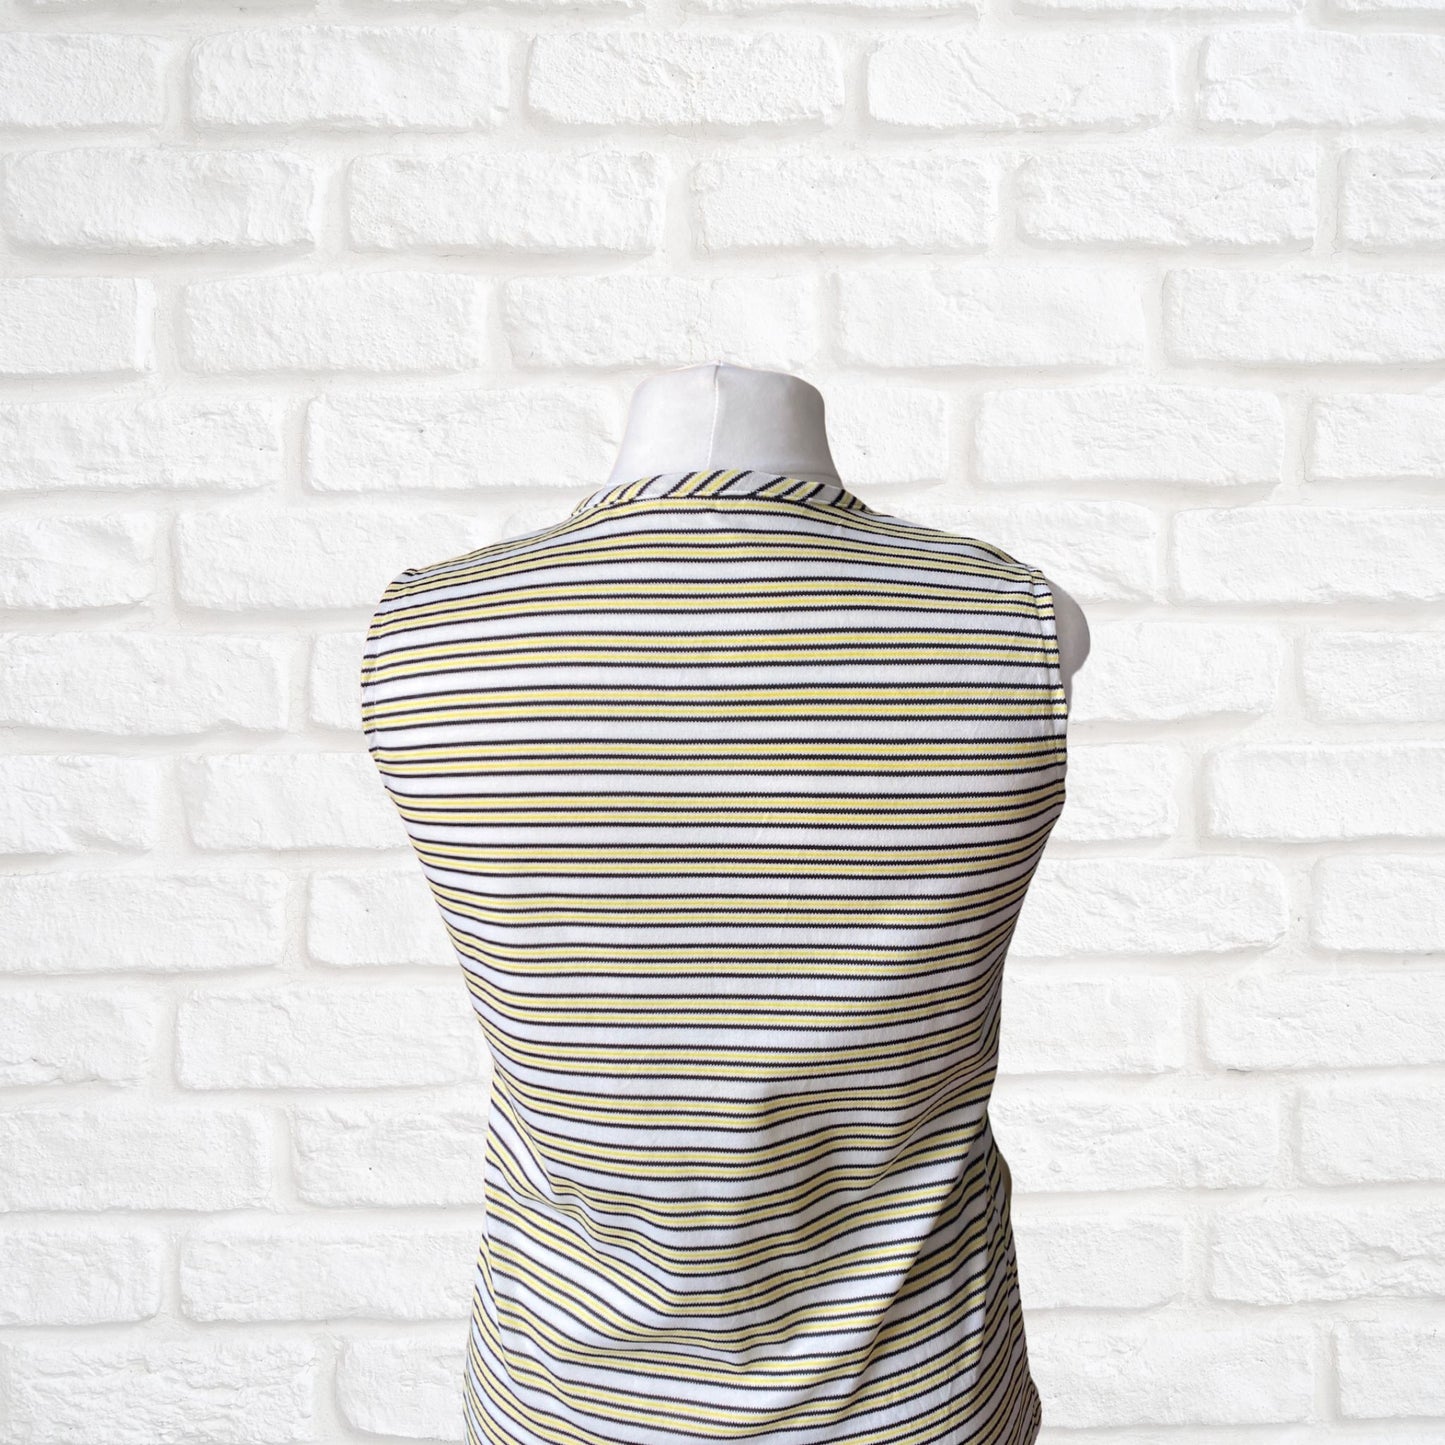 Stylish Vintage 60s Yellow, White, and Black Striped Sleeveless Top with Keyhole Tie Neckline . Approx UK size 14-18